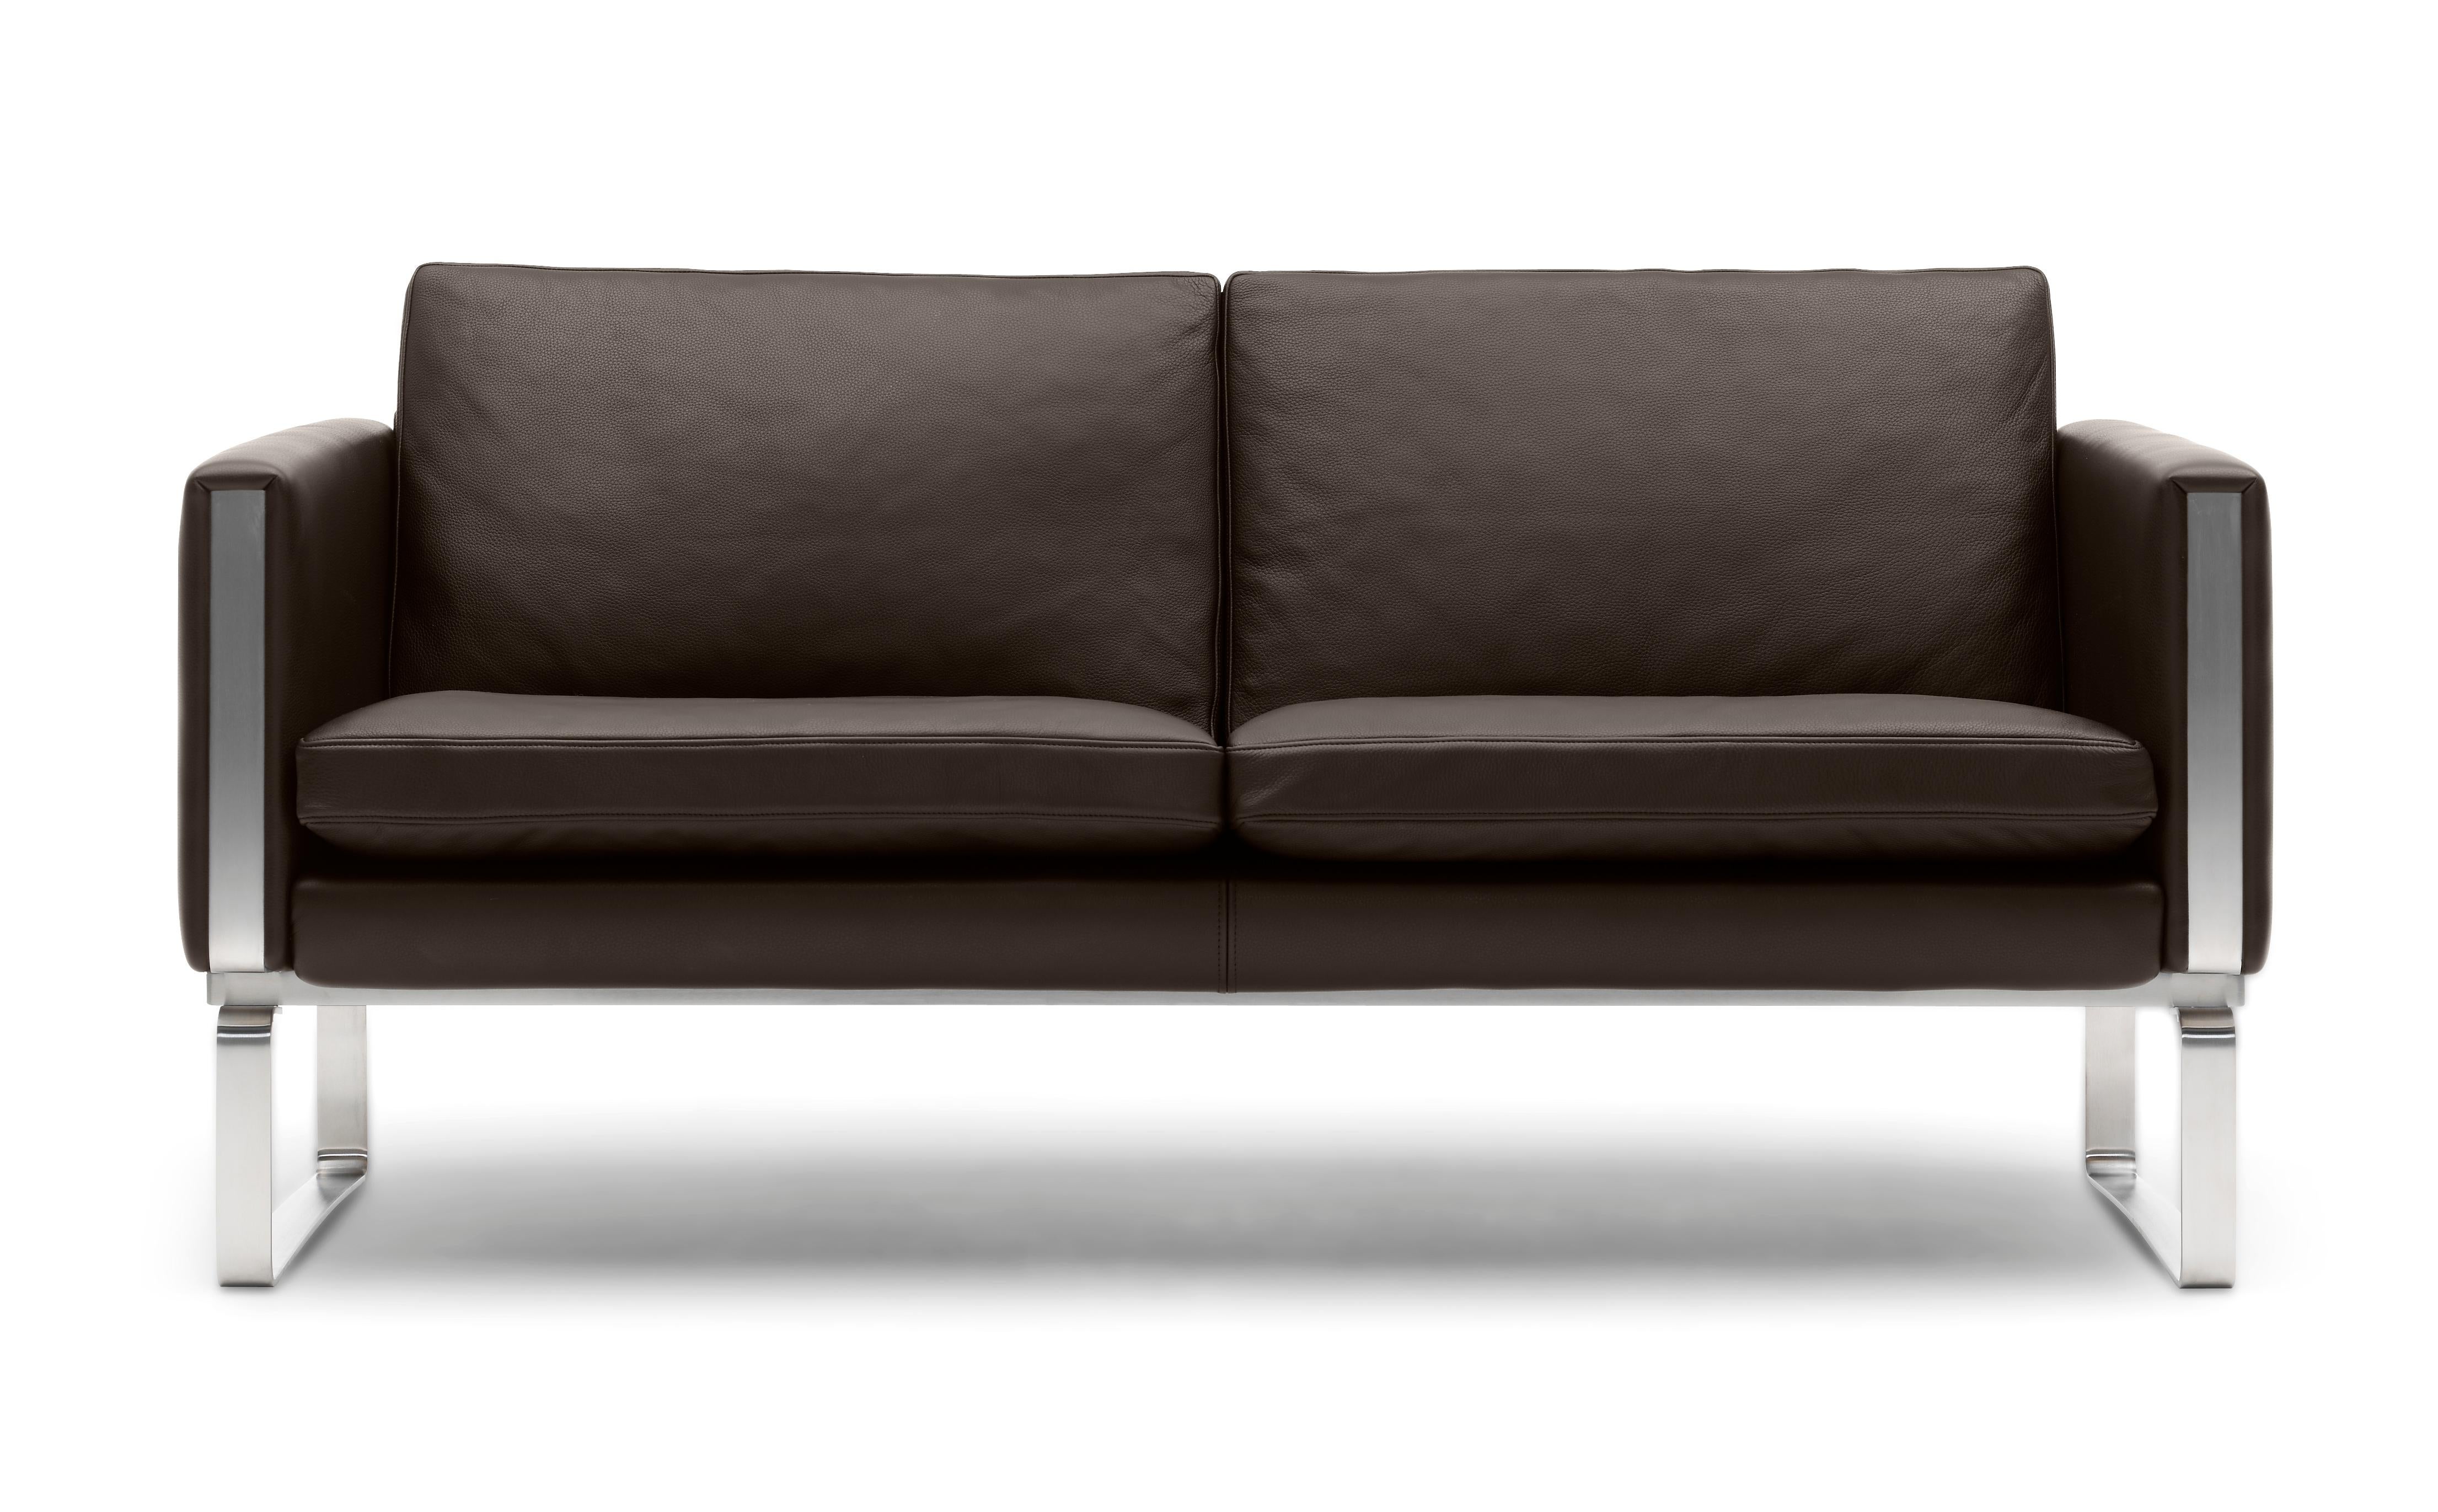 Brown (Thor 306) CH102 2-Seat Sofa in Stainless Steel Frame with Leather Seat by Hans J. Wegner